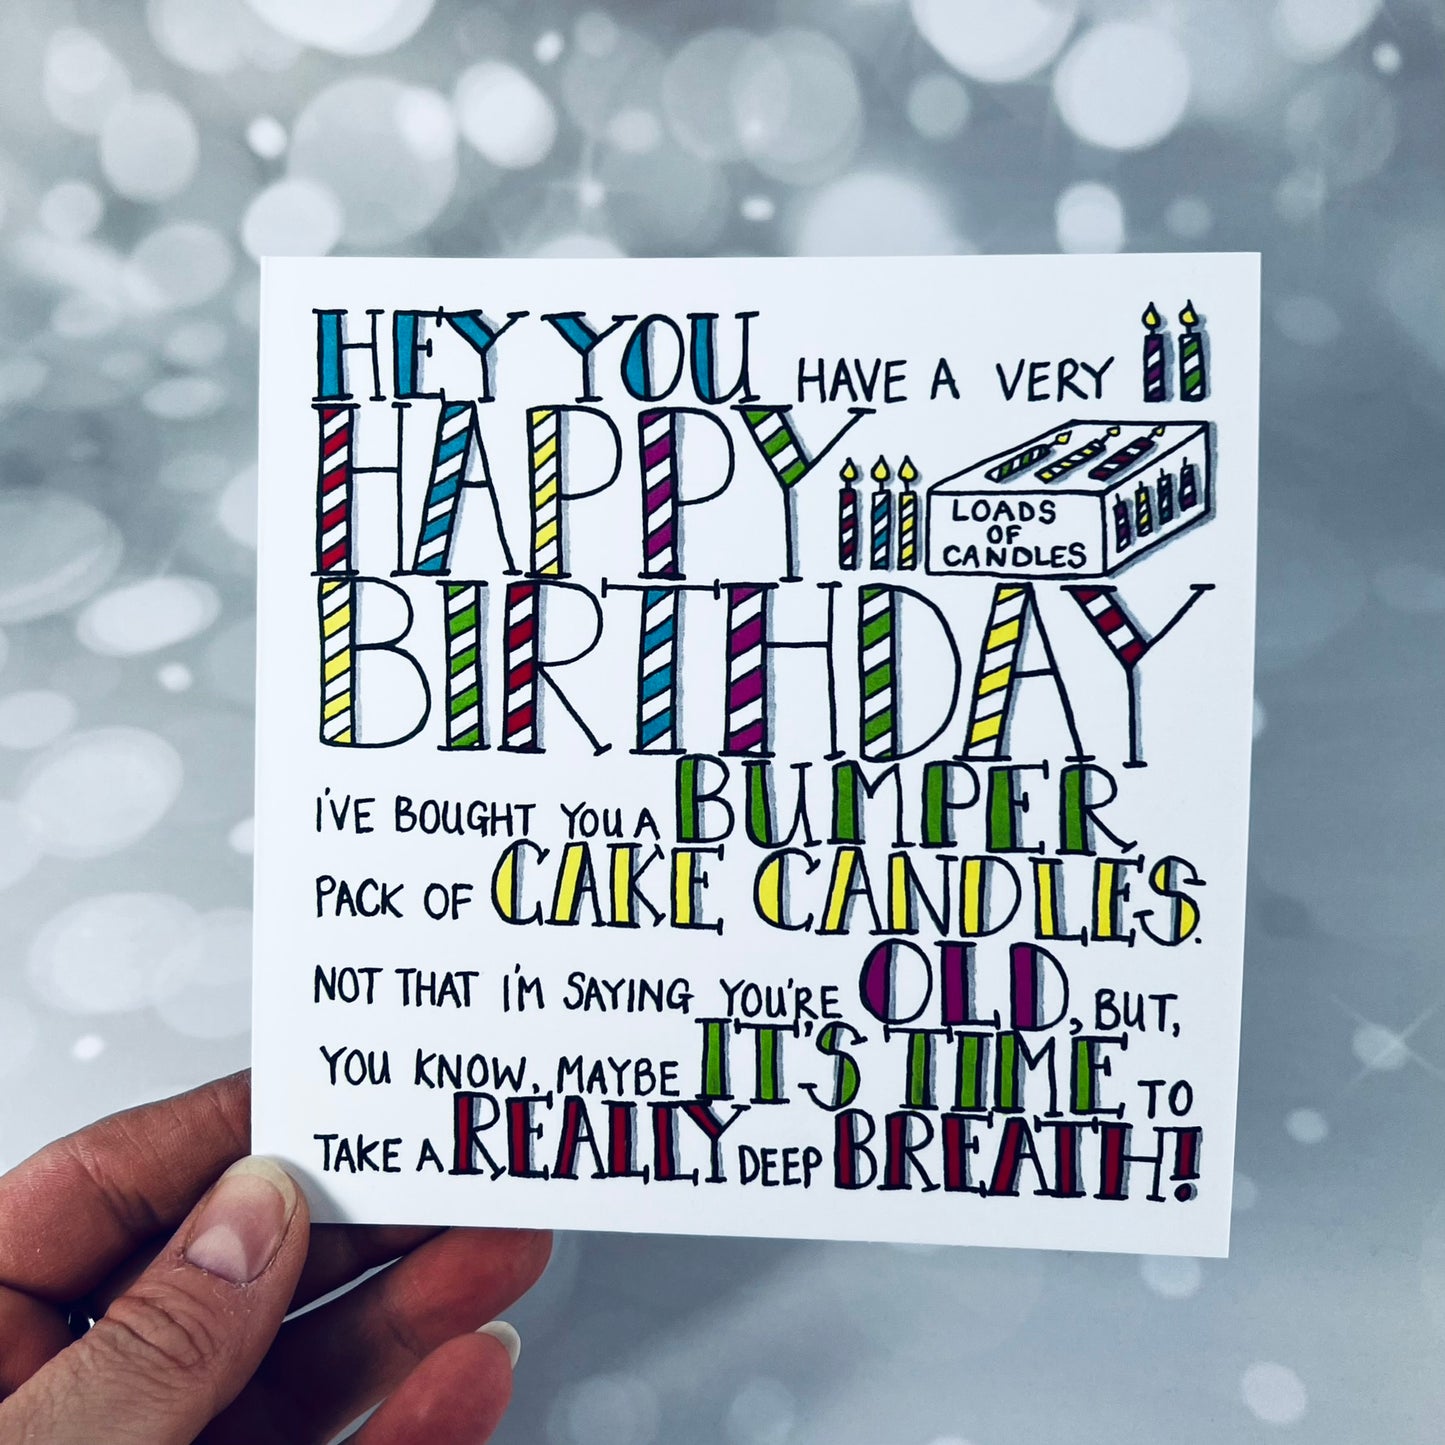 Cool Birthday Cards | Fun Birthday Cards For Her